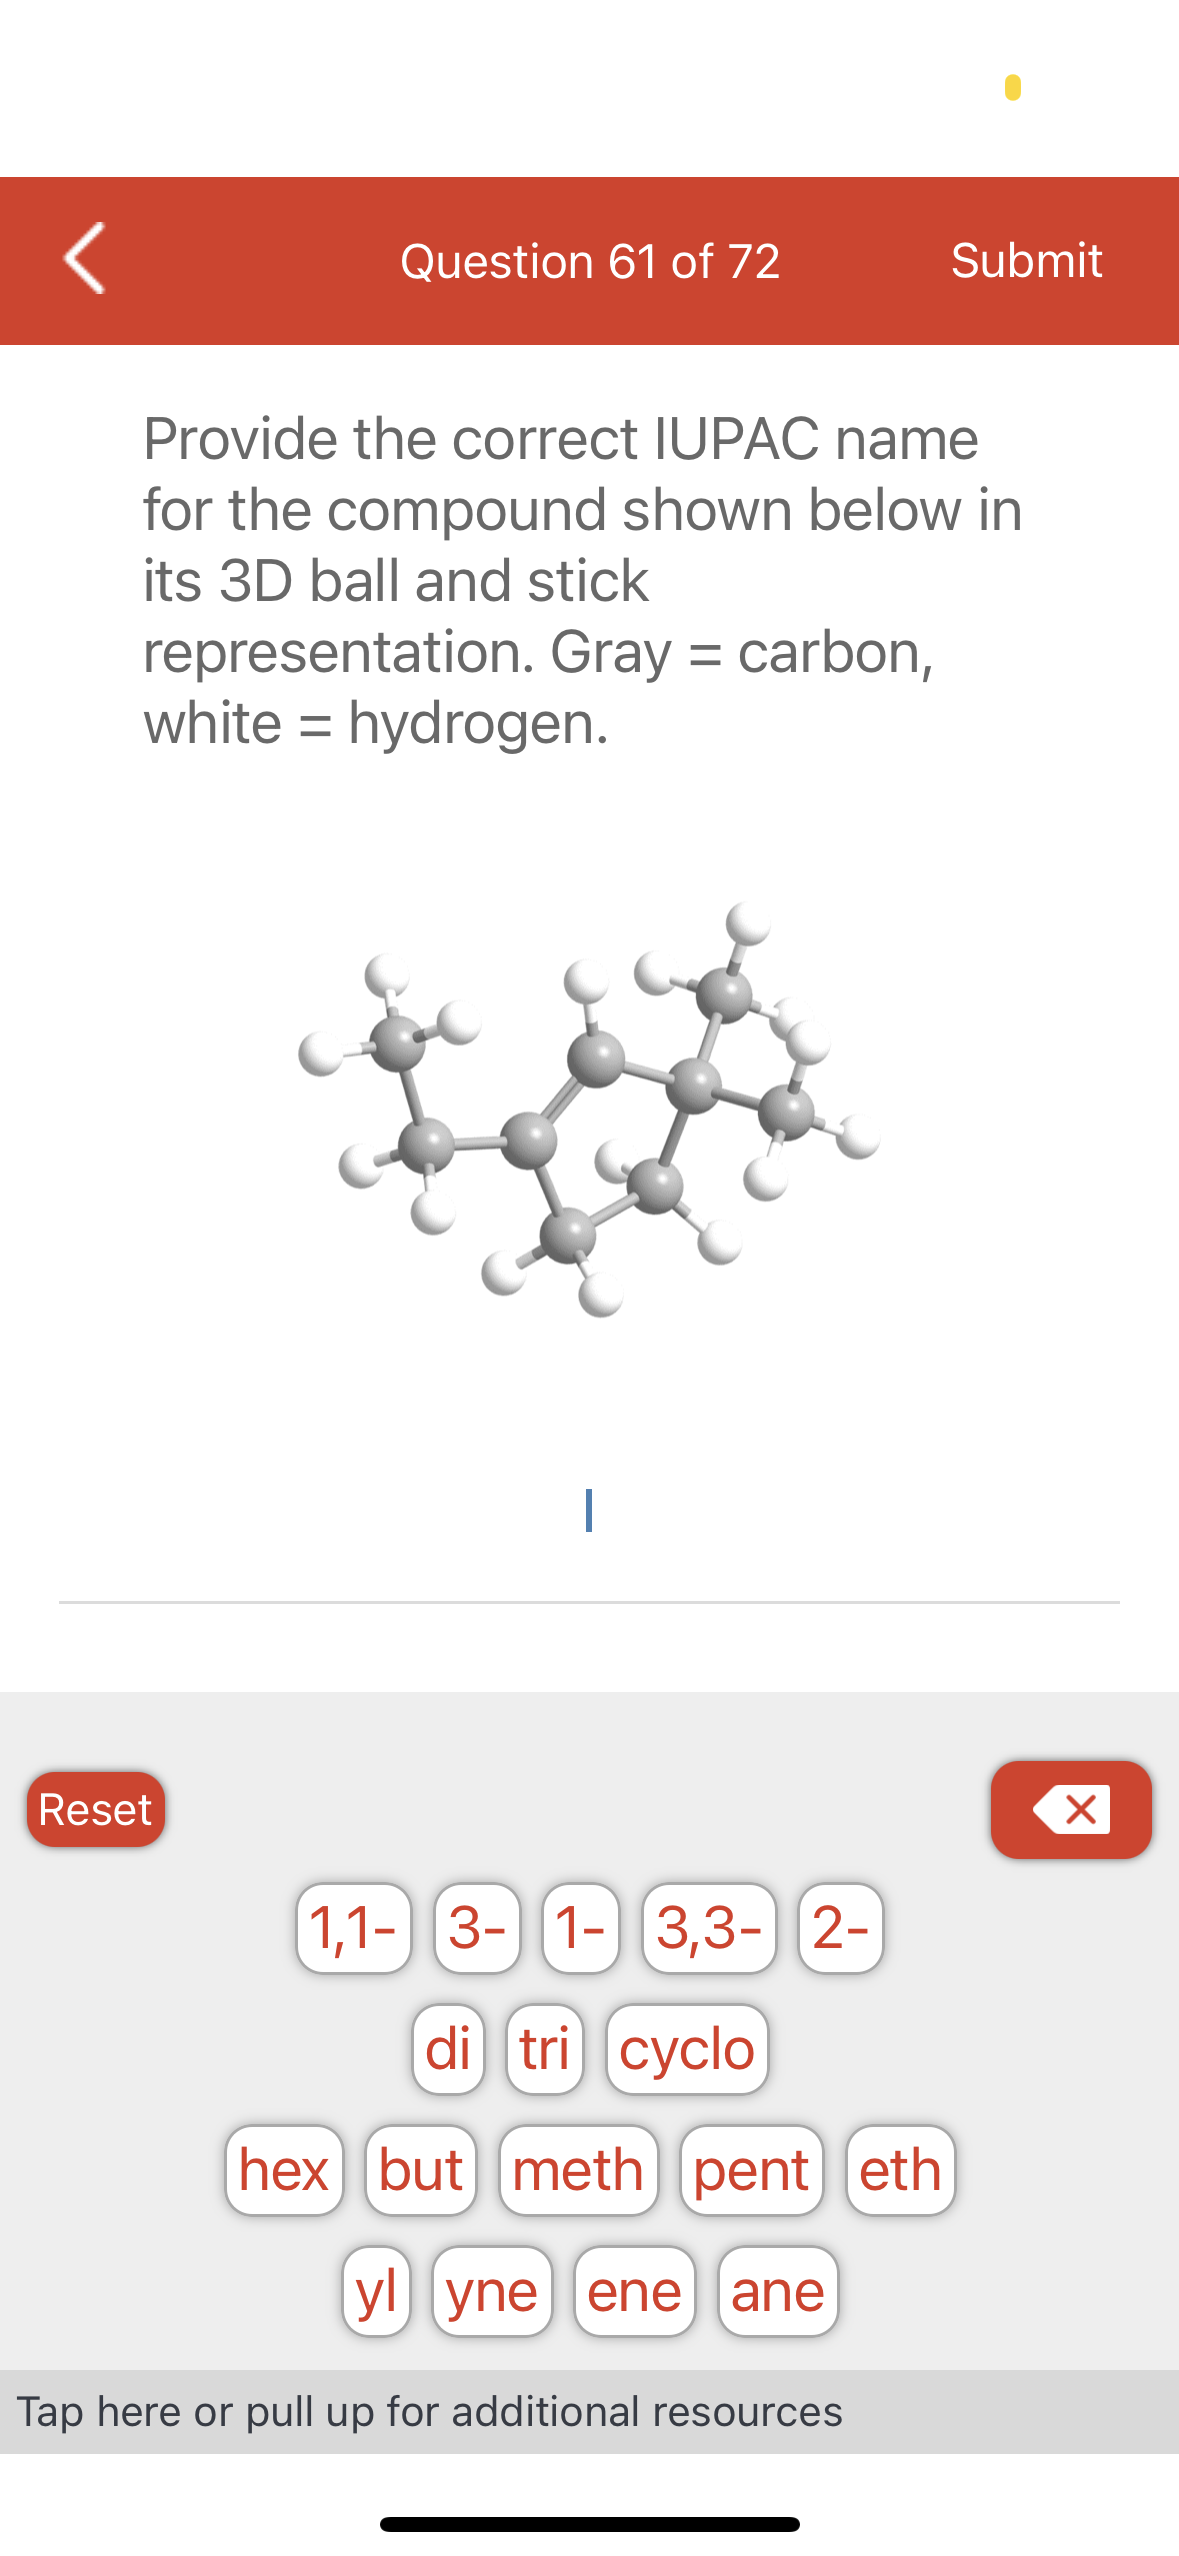 Question 61 of 72
Provide the correct IUPAC name
for the compound shown below in
its 3D ball and stick
representation. Gray = carbon,
white = hydrogen.
Reset
1
1,1- 3-1- 3,3- 2-
di tri cyclo
hex but meth) pent eth
ylyne ene ane
Submit
Tap here or pull up for additional resources
X